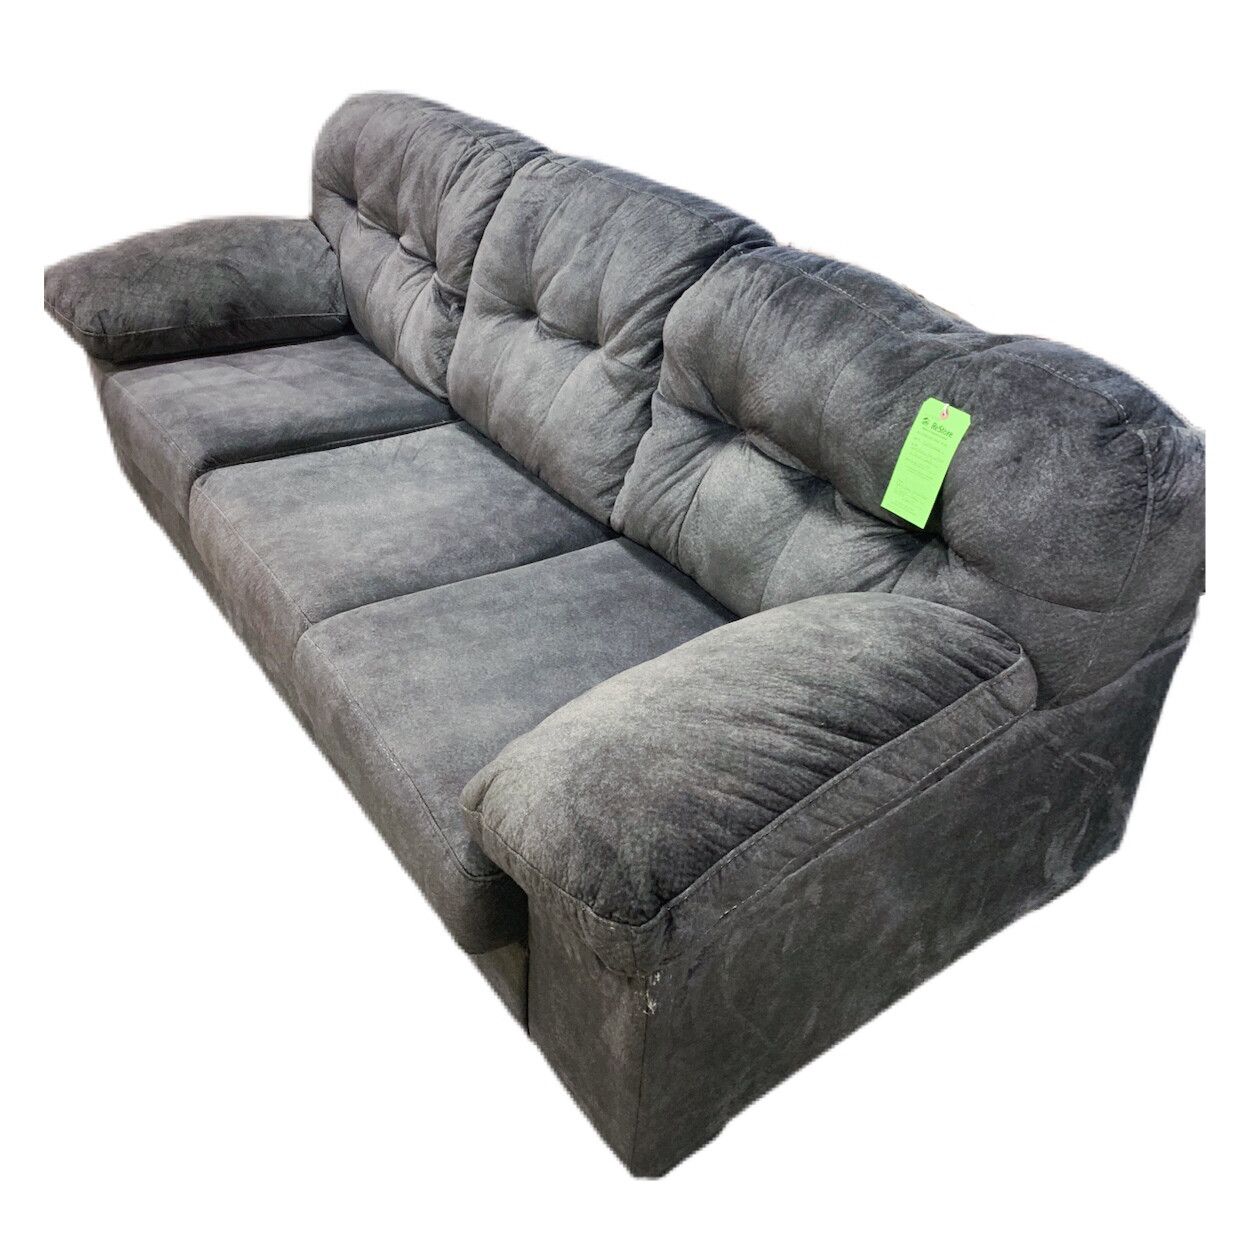 Dark Gray Microfiber 3 Seat Sofa Intended For Dark Grey Polyester Sofa Couches (View 15 of 20)